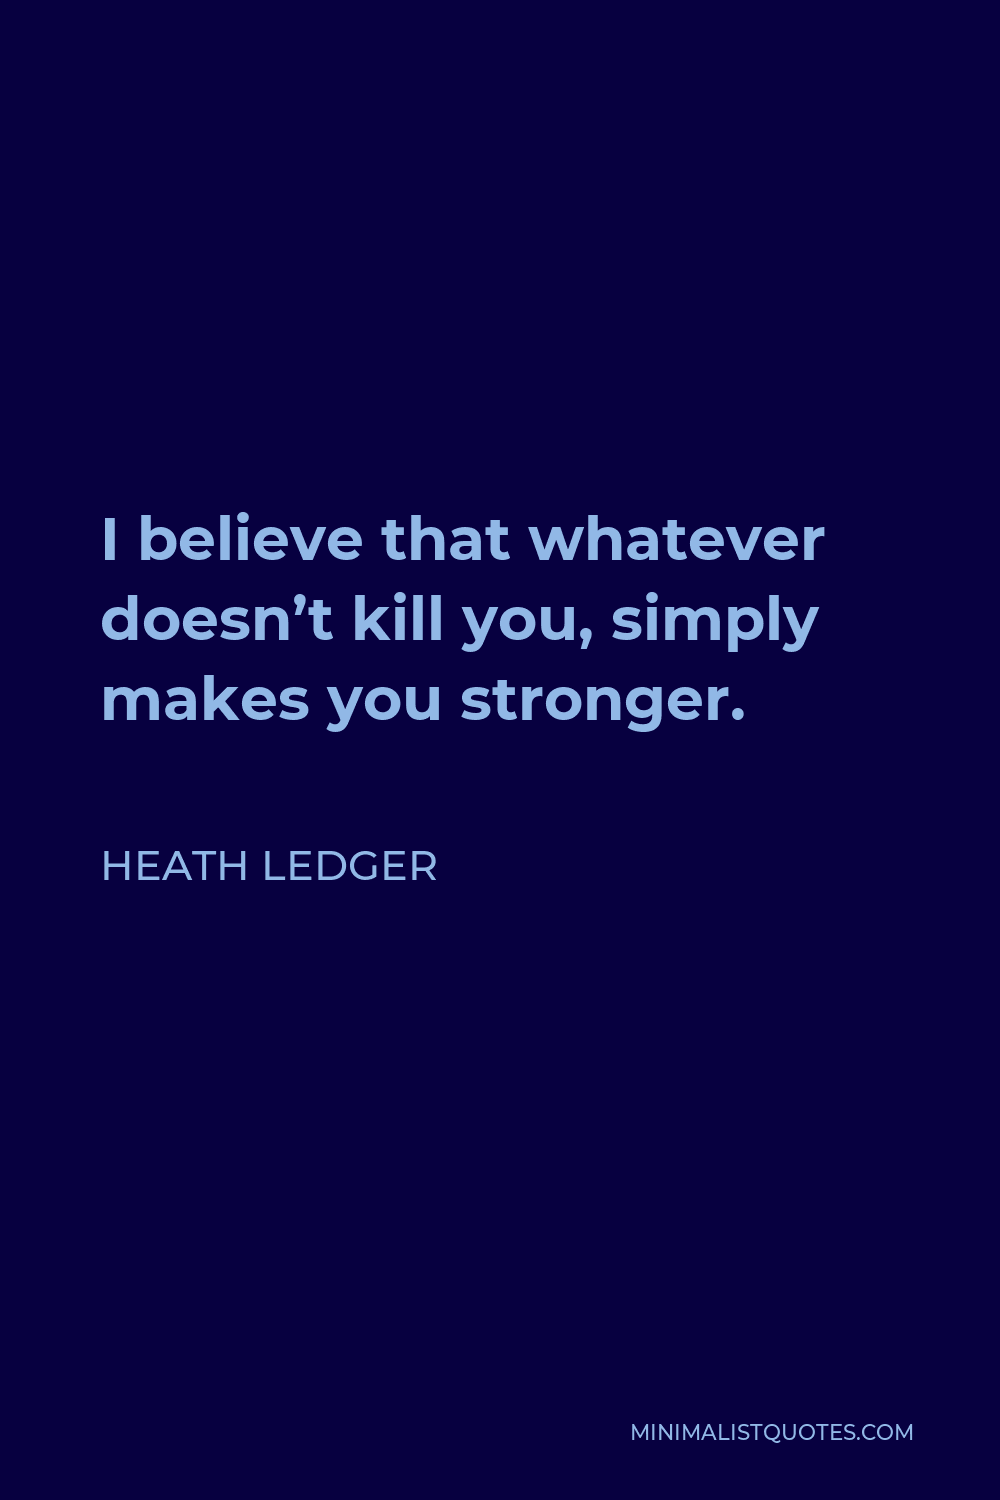 Heath Ledger Quote - I believe that whatever doesn’t kill you, simply makes you stronger.